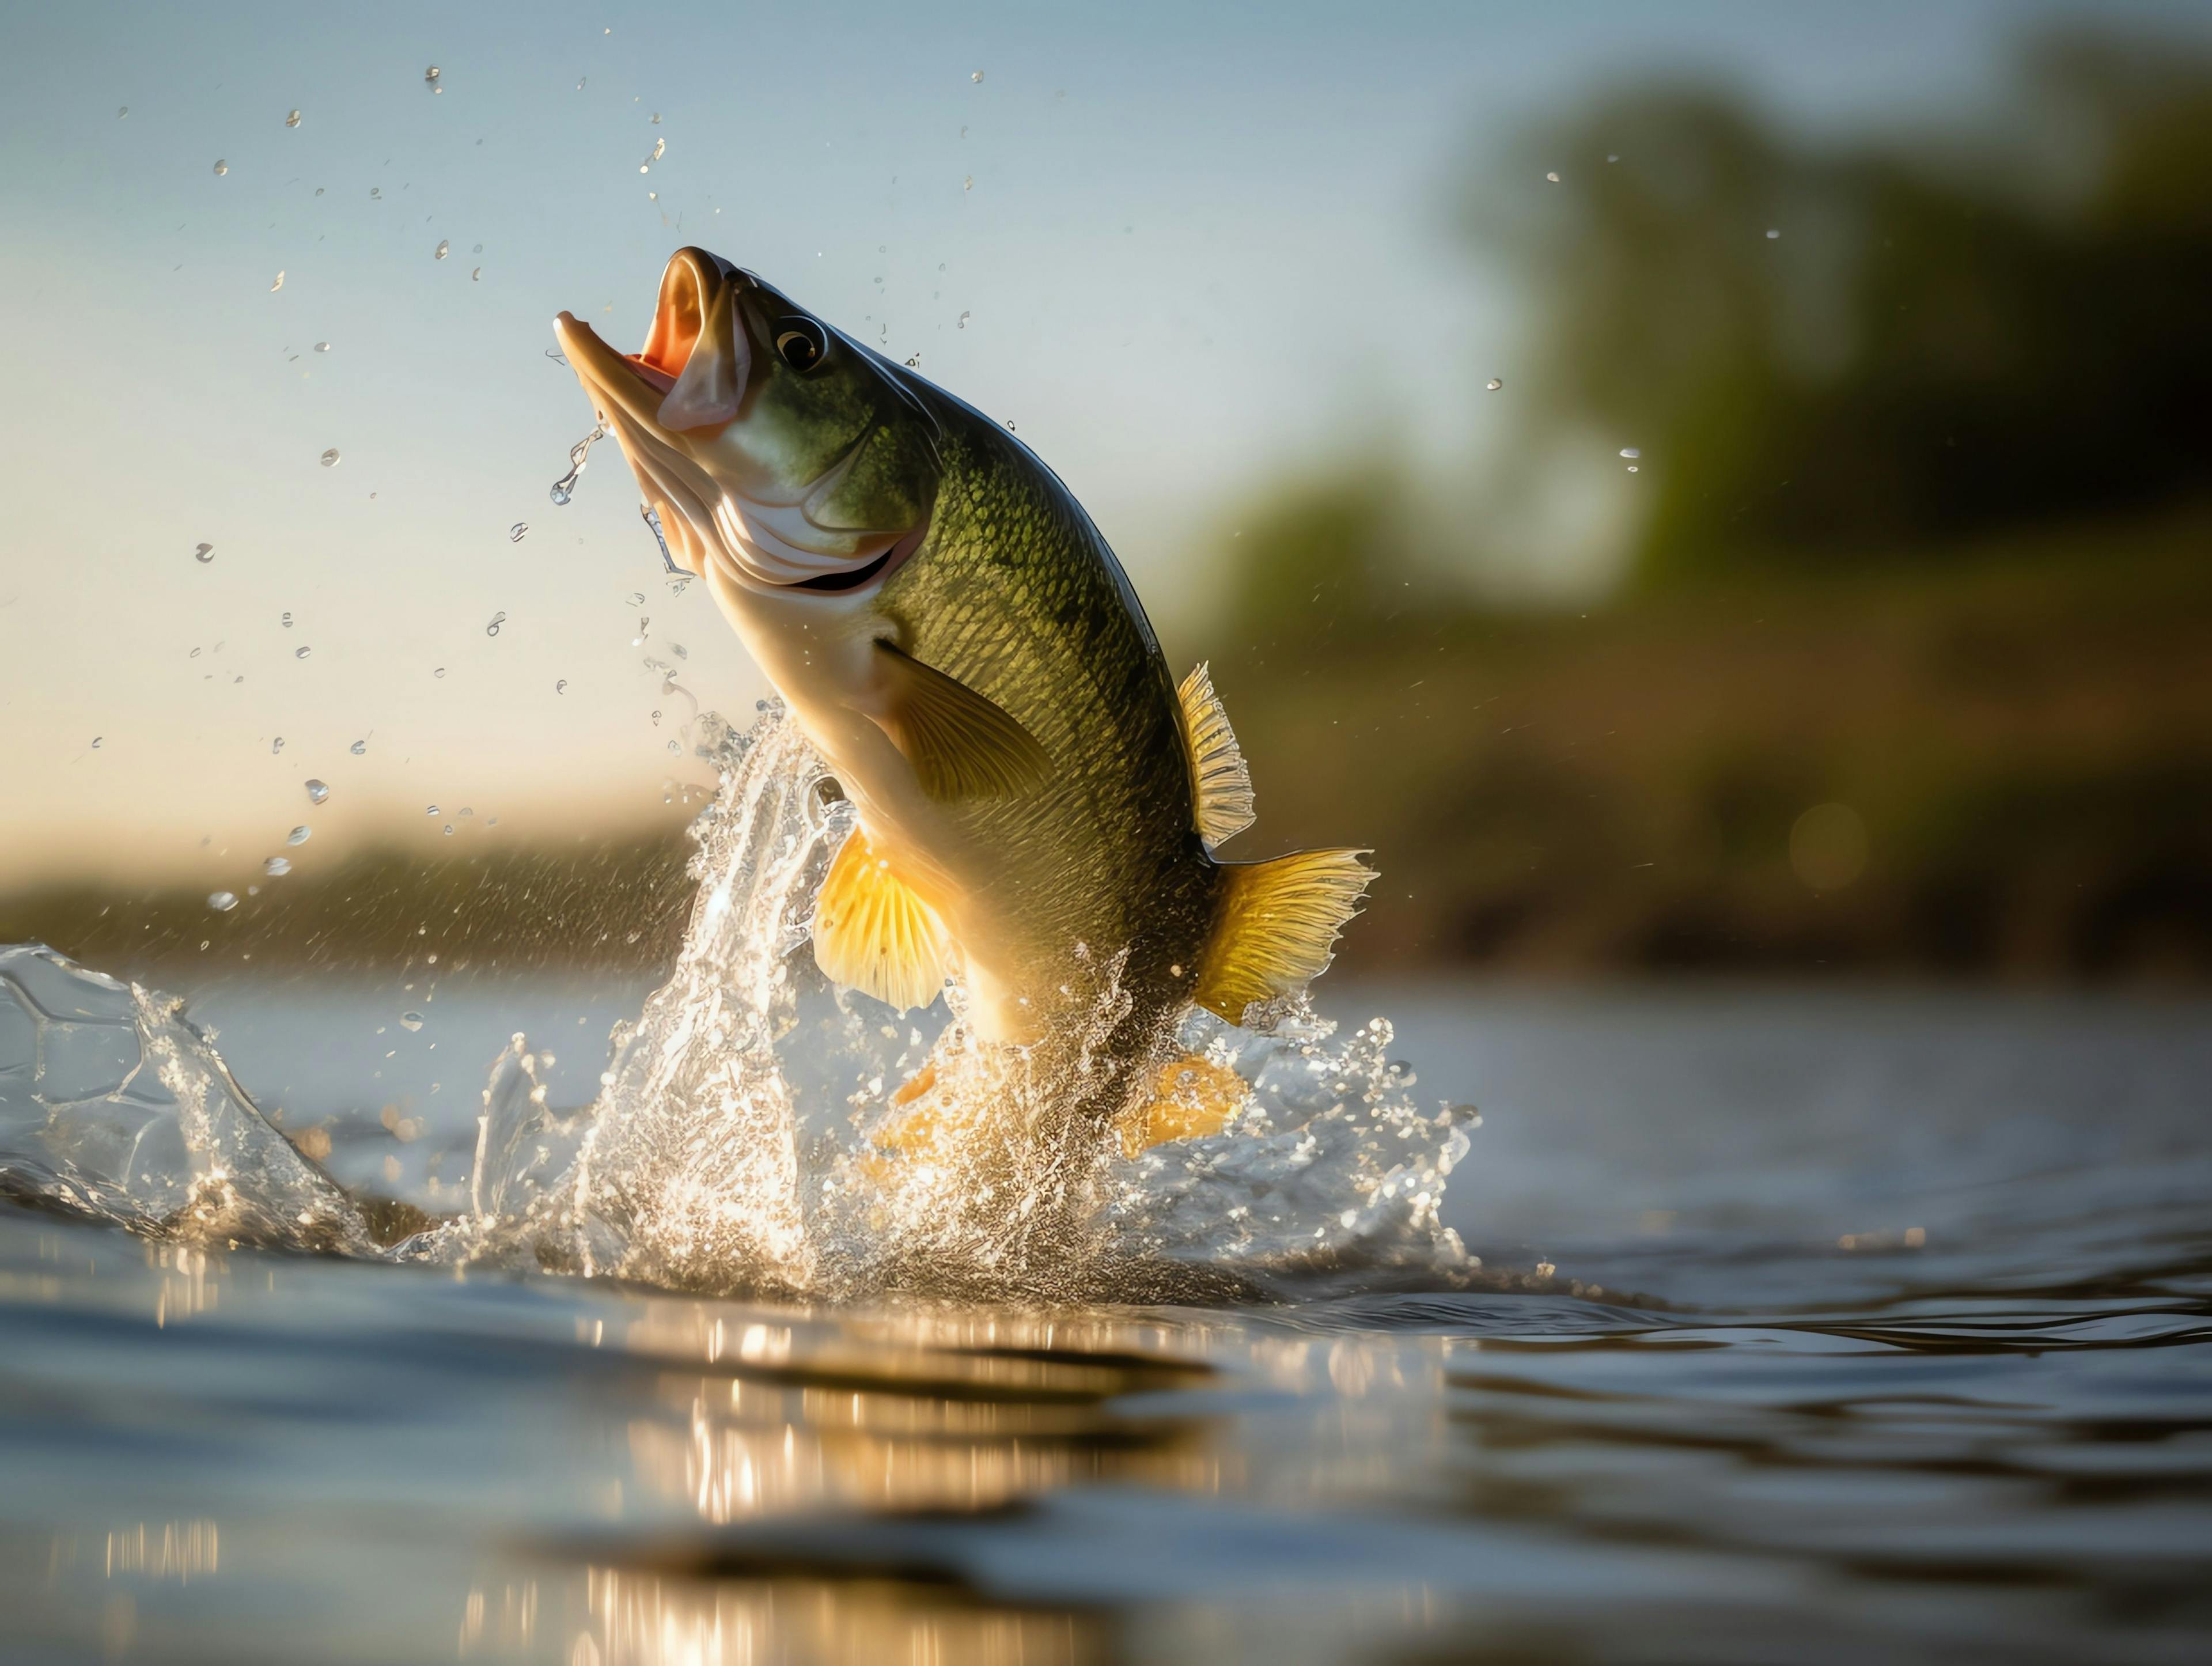 Fishing trophy - big freshwater perch in water on green background. | Image Credit: © Medard - stock.adobe.com